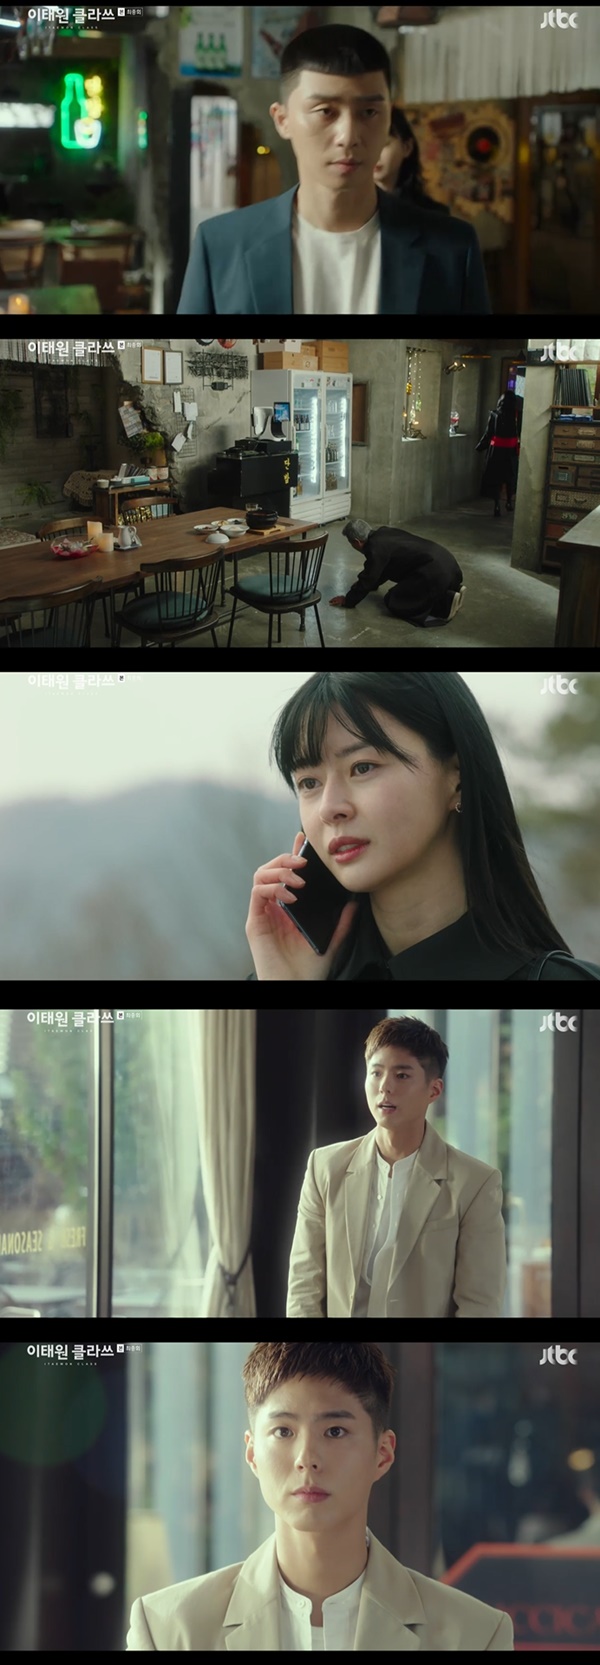 Itaewon Klath Park Seo-joon and Kim Da-mi, all of whom had a happy ending.In the JTBC gilt drama Itaewon Clath (playplayed by Cho Kwang-jin and director Kim Sung-yoon) broadcast on the 21st, Park Seo-joon knelt down to Jang Dae-hee (Yoo Jae-myung) to save Jang Geun-soo (Kim Dong-hee) and Joy Seo (Kim Da-mi), who were kidnapped by Jang The Fountainhead (An Bo-hyun).On this day, Jang Dae-hee said, I am only kneeling at work. I have lost my faith. How do you feel now?I thought it was worth decades to fight this fight, and that man had to kneel against the hostages, and I regret the time he chased the ugly old man.Then Jang Dae-hee looked at Roy blankly, shocked. Then Roy left, saying, I knew you after decades.At that time, Jang Geun-soo and Joy Seo were once again in Danger; Joyser raised his weapon with trembling hands and succeeded in escaping, but was quickly pursued.At Dangers moment, Roy pulled up and asked Roy, Where are you?Choi Seung-kwon (Ryu Kyung-soo) sent Joy and Roy at the expense of himself.So Park confessed to Joy, I remember when I played in Itaewon before, in my head, my heart is full of you.Is it okay? asked Joy, and then Roy said, Was this your heart too? Im shaking. I love you. I love you so much.Then the police report ended with the arrest of Jean Fountainhead, who once again hugged Joysu with a sigh of relief that opened his eyes in the hospital.Since then, Jang has been investigated by the prosecution for alleged collusion with gangsters, murder, kidnapping, embezzlement, and bribery.At the extraordinary shareholders meeting, Park revealed his aspiration to flourish the Jangga group and received applause from the executives.SuA (Kwon Nara), who had previously accused the Janga group of corruption for Park Sae, also finished with a happy ending. SuA told Park, I will live my real life now.I want to ask you a favor. Please live happy. After that, Jang apologized to everyone and left for studying in the United States.After Park Bo-gum appeared in surprise and surprised viewers: SuA, who saw chef candidate Park Bo-gum who came to the interview, said, Hit the jackpot!I was impressed and welcomed the happy ending.